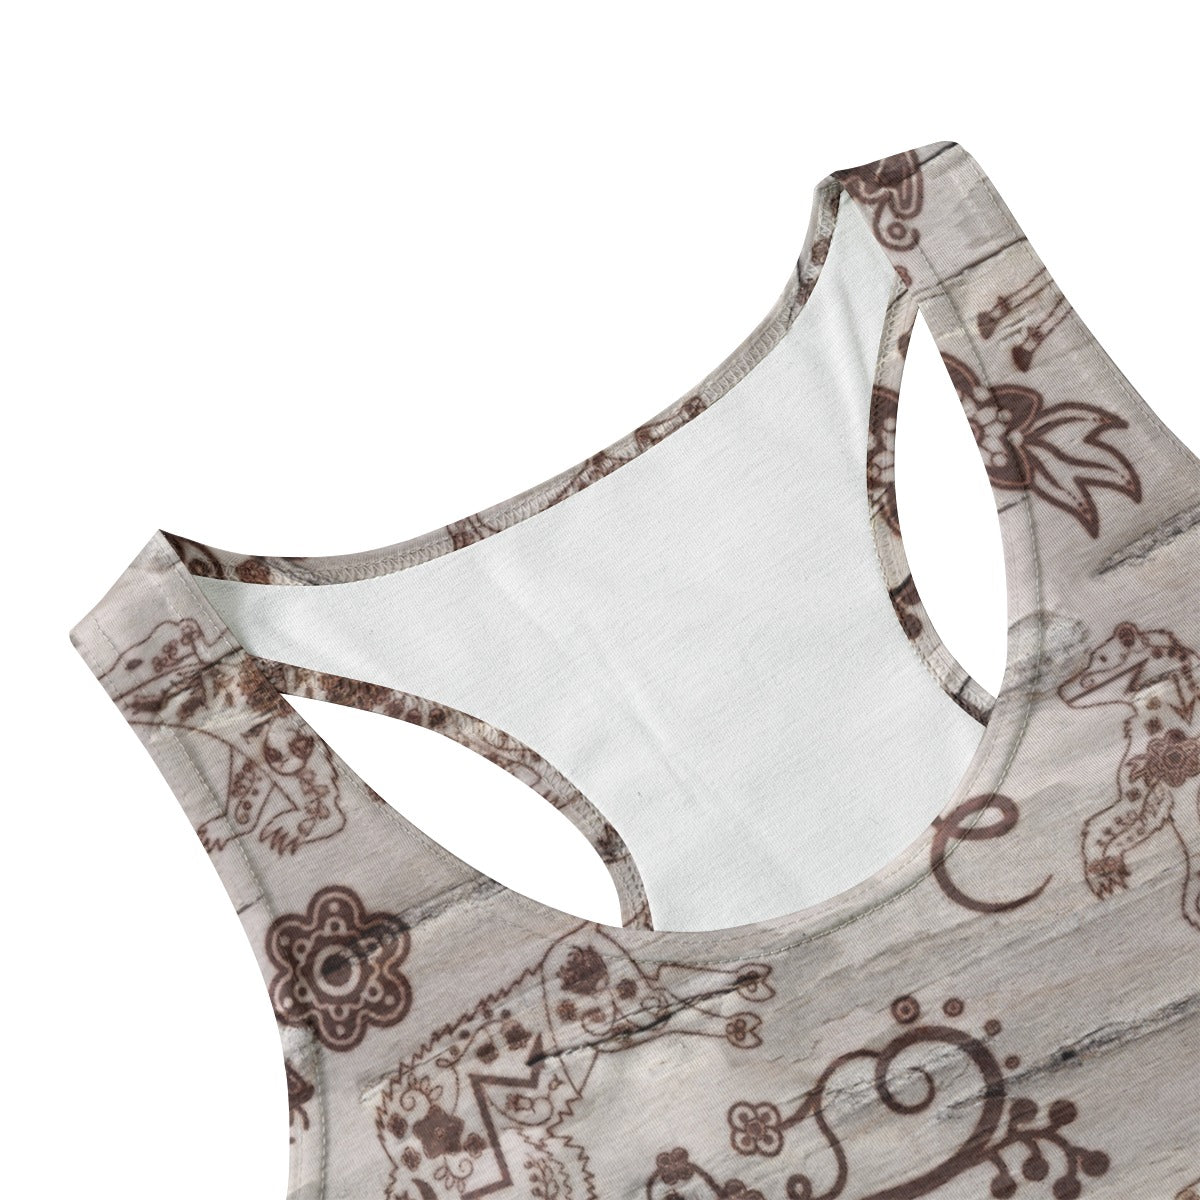 Forest Medley Eco-friendly Women's Tank Top